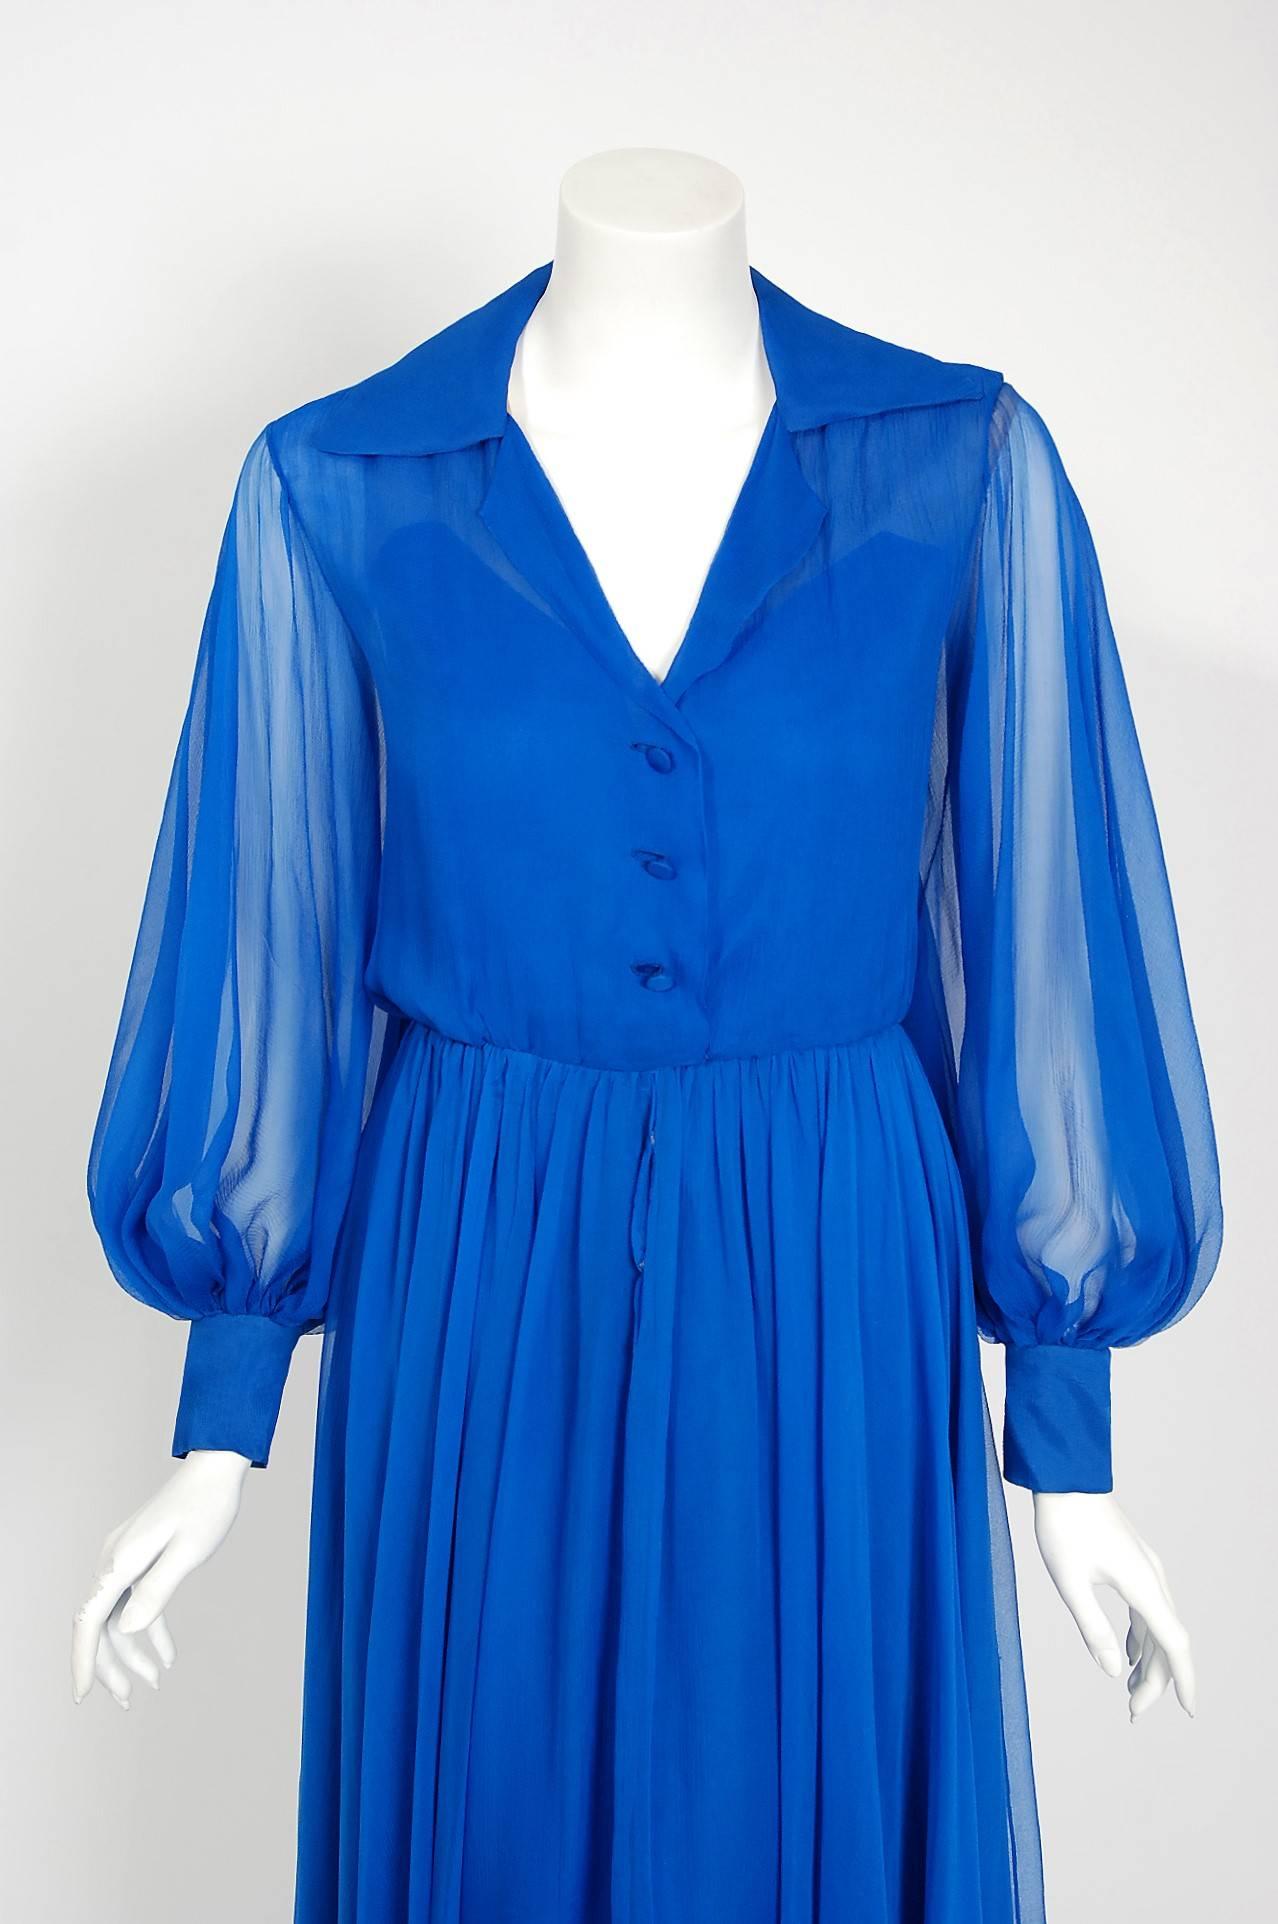 A gorgeous Christian Dior sapphire blue silk chiffon show-stopper dating back to their 1973 collection.  When the talented Marc Bohan took over as head designer in 1960, he continued the Dior tradition of elegant design and this beautiful dress is a